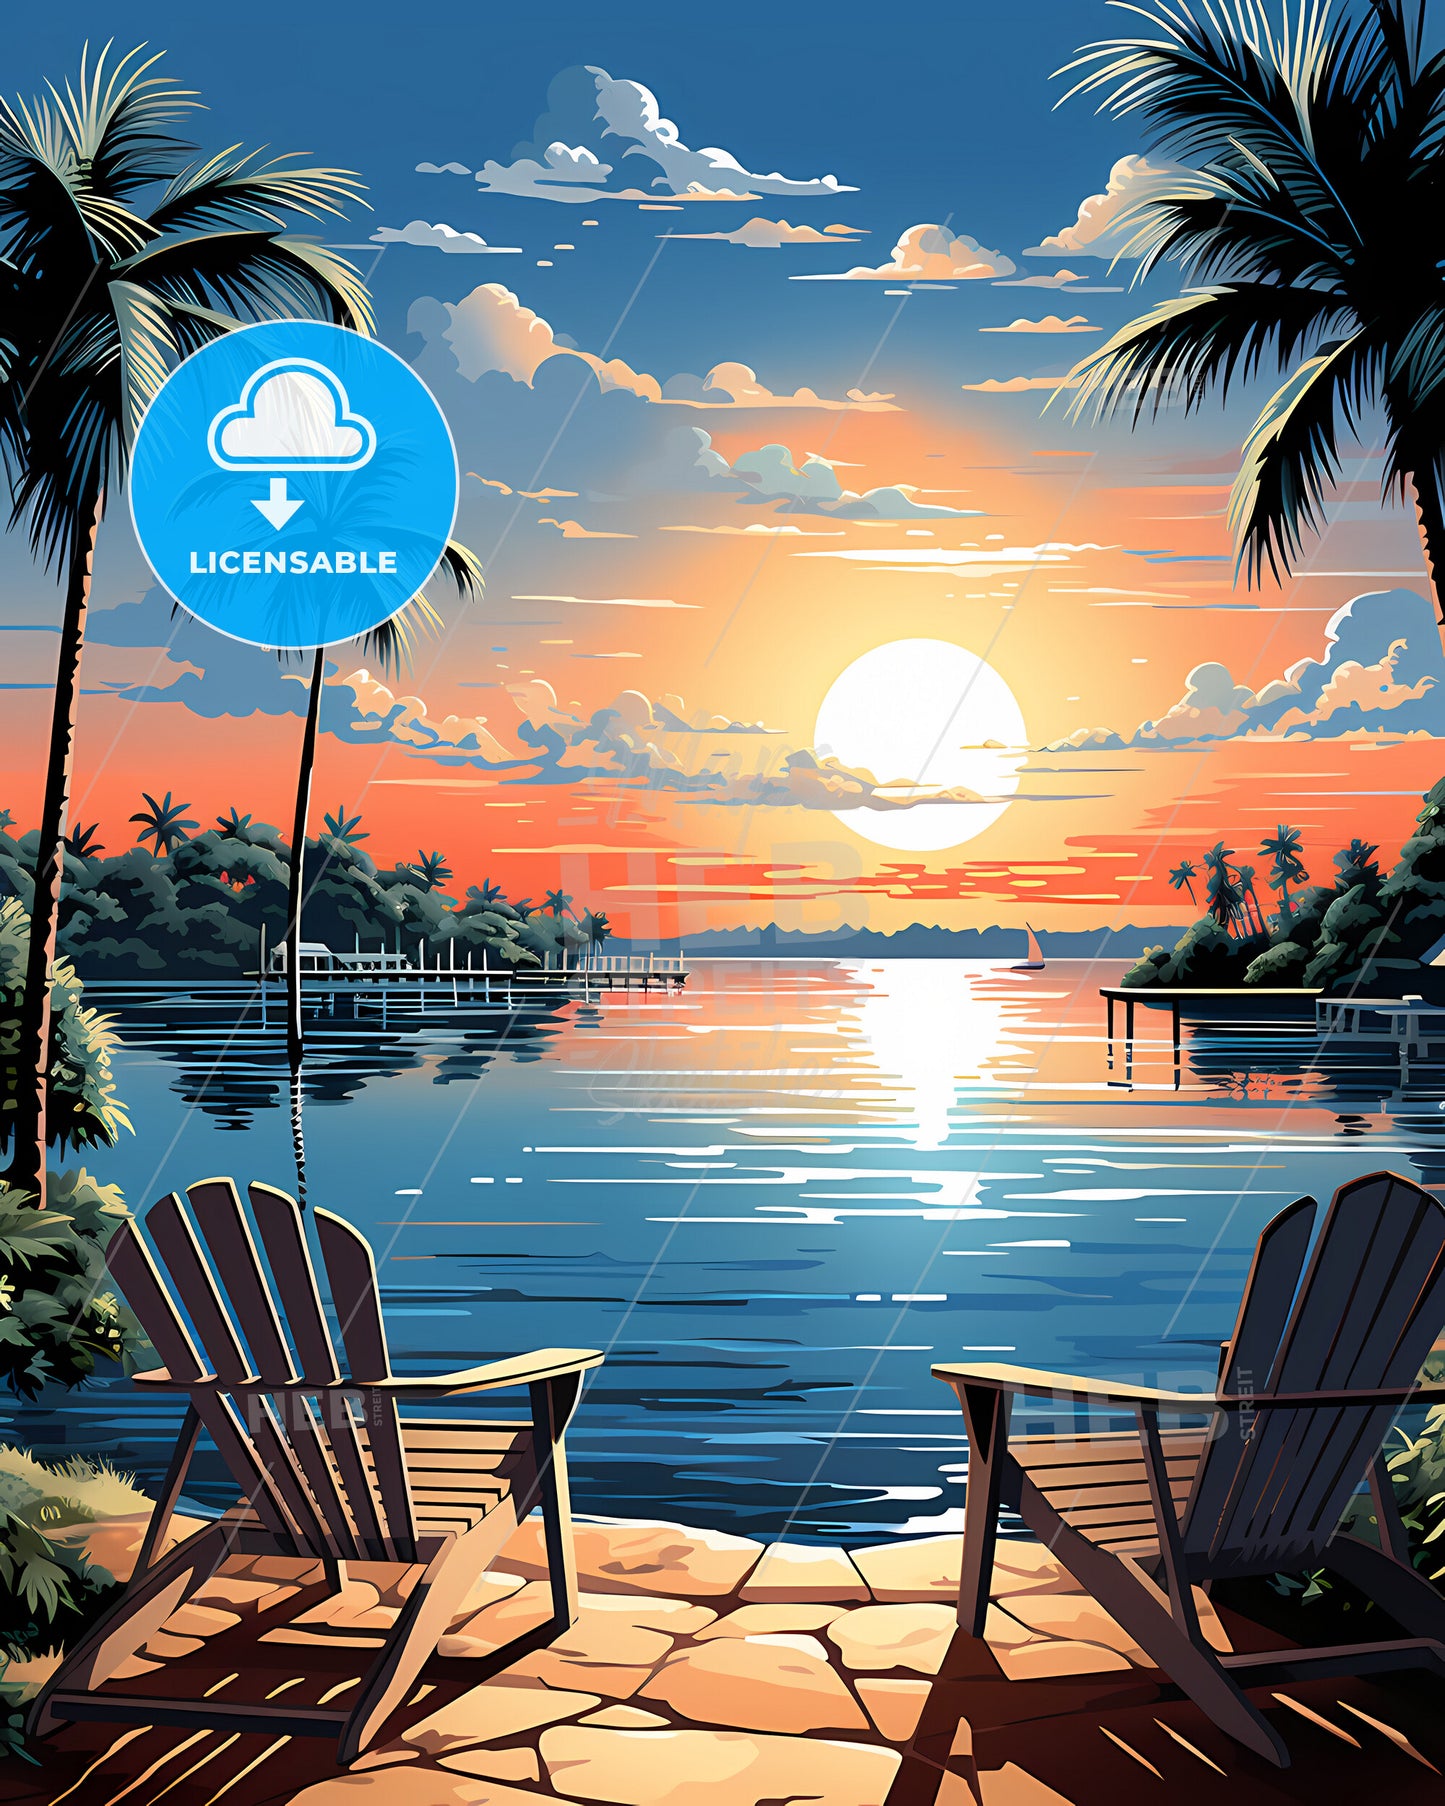 North Port, Florida, a sunset over a body of water with chairs and trees